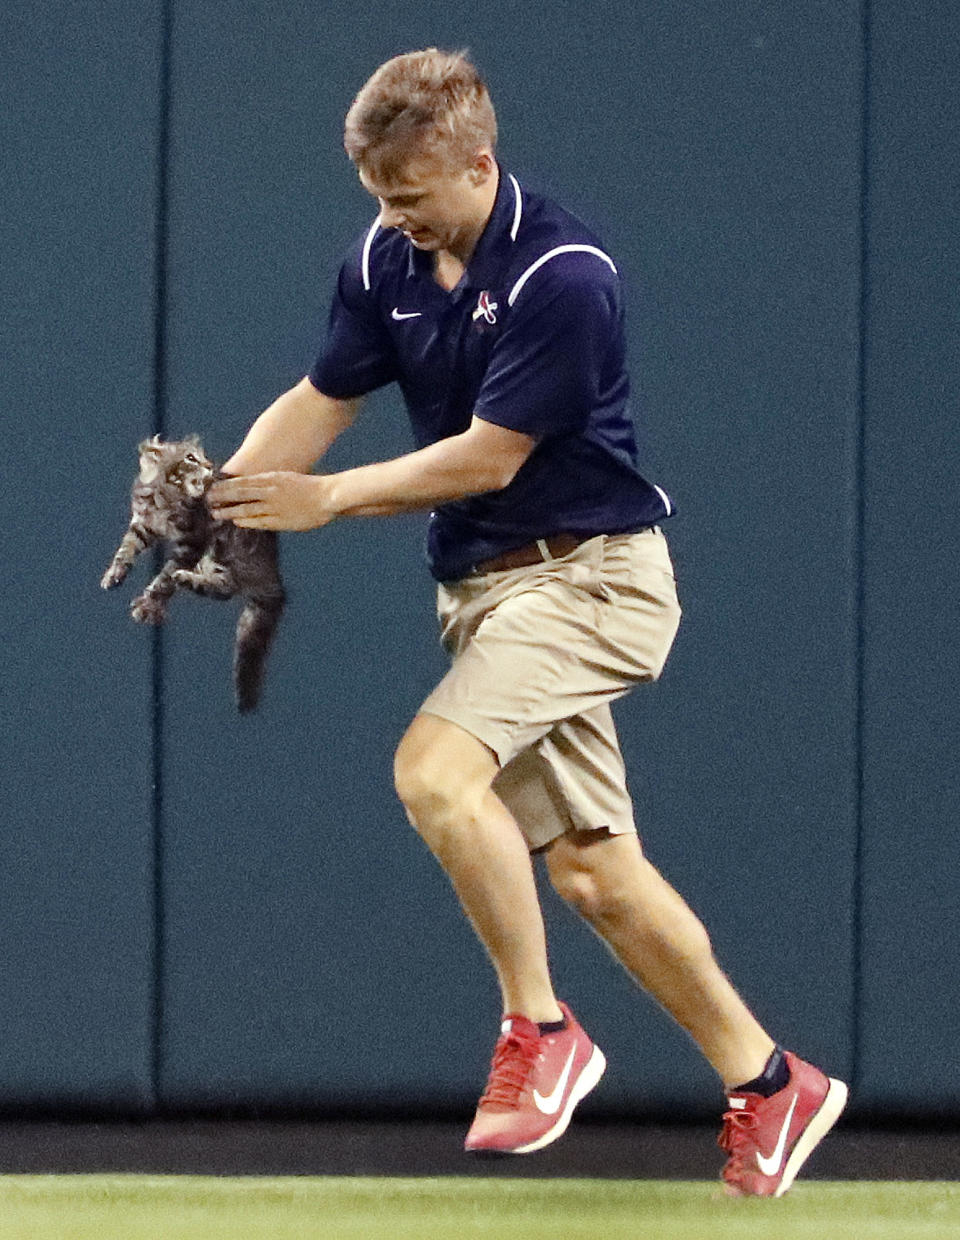 <p>A member of the Busch Stadium grounds crew removes a cat that had run onto the field during the sixth inning of a baseball game between the St. Louis Cardinals and the Kansas City Royals on Wednesday, Aug. 9, 2017, in St. Louis. (AP Photo/Jeff Roberson) </p>